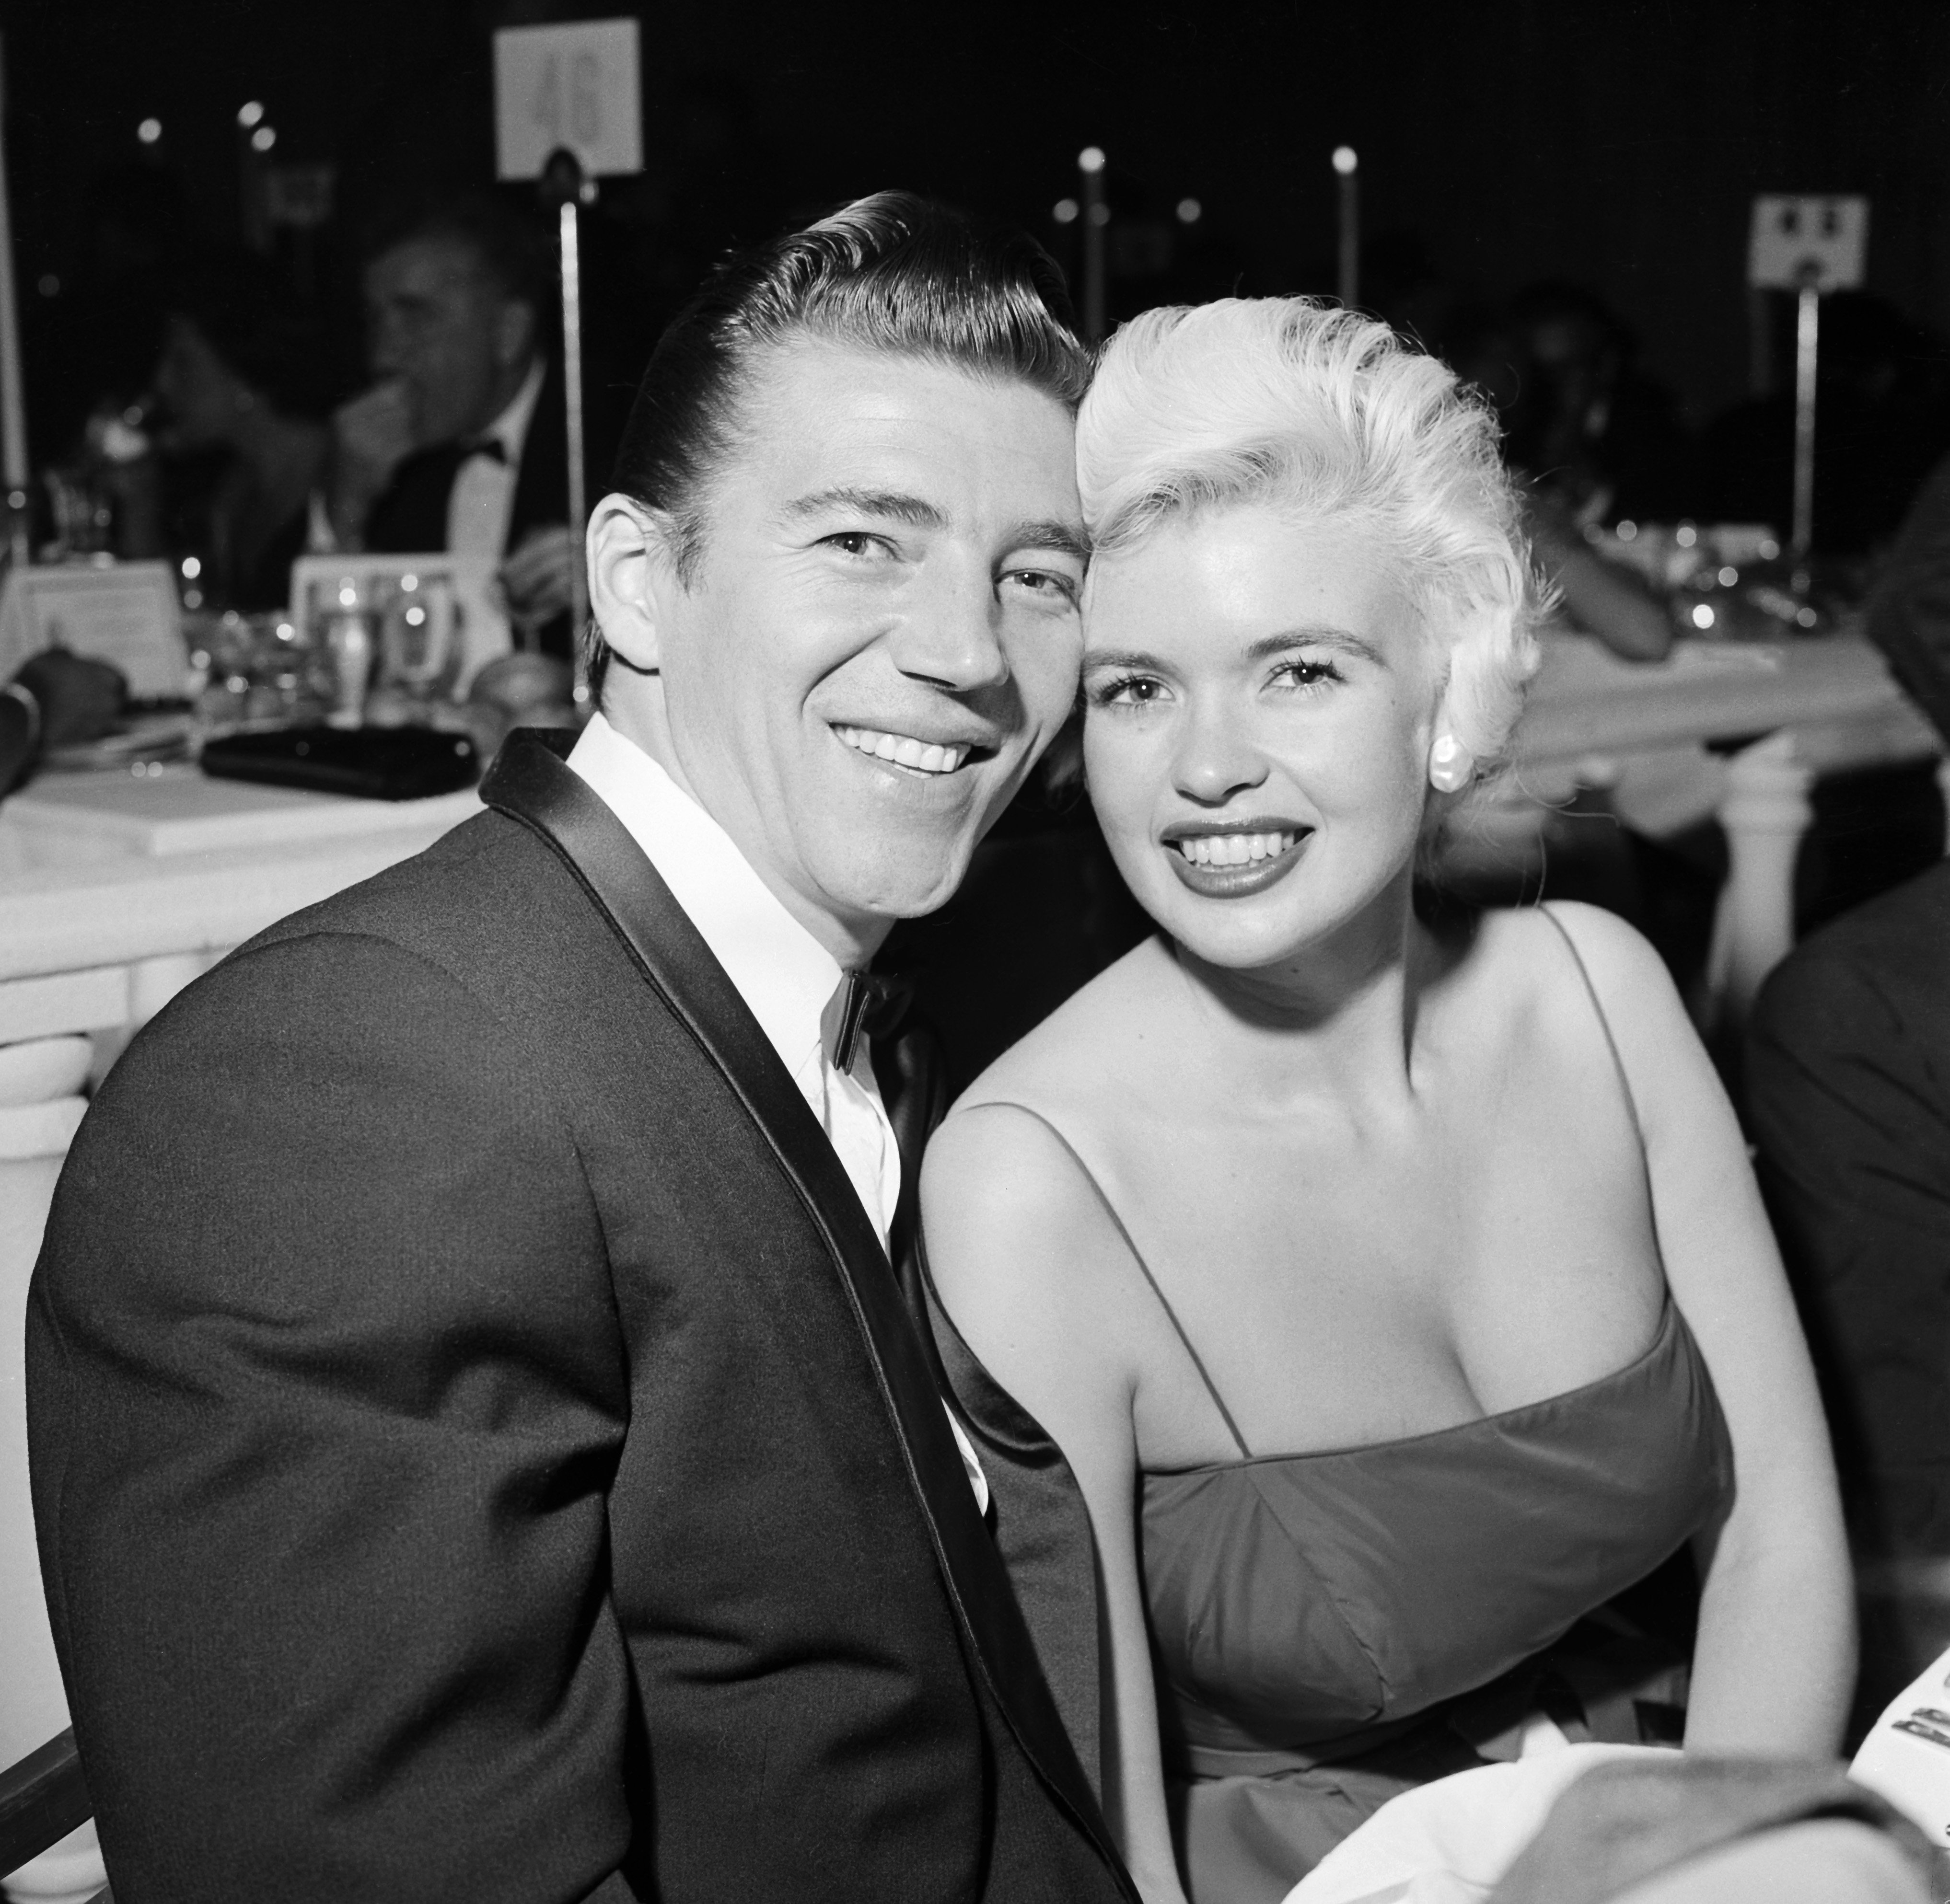 Mickey Hargitay and Jayne Mansfield at an event in Los Angeles circa 1958 | Source: Getty Images